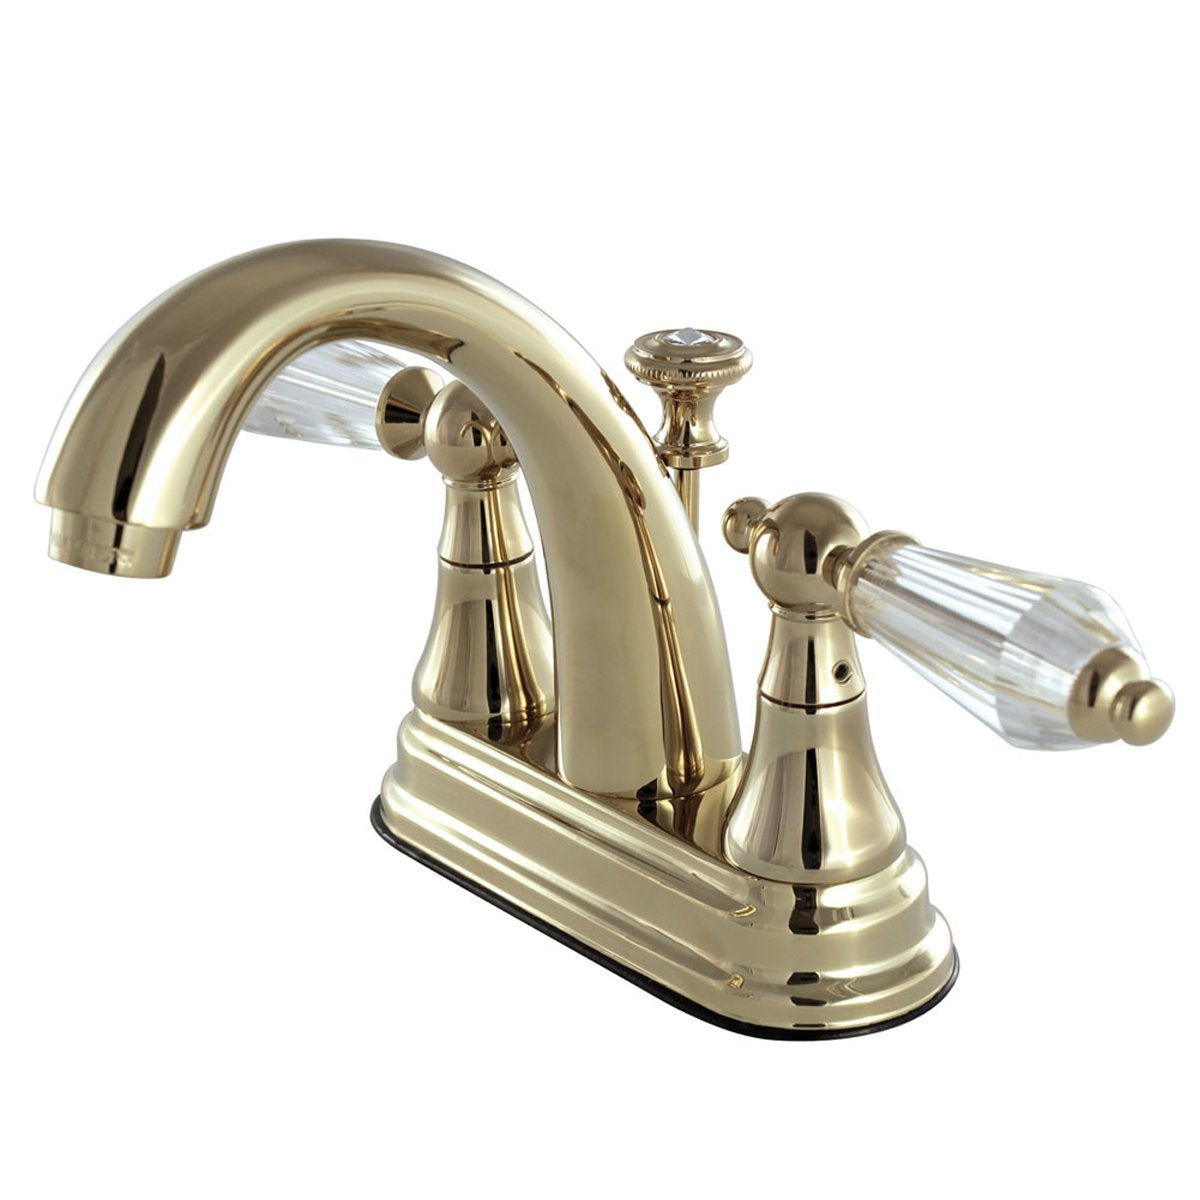 Kingston Brass Deck Mount 4" Centerset Lavatory Faucet with Brass Pop-up-Bathroom Faucets-Free Shipping-Directsinks.